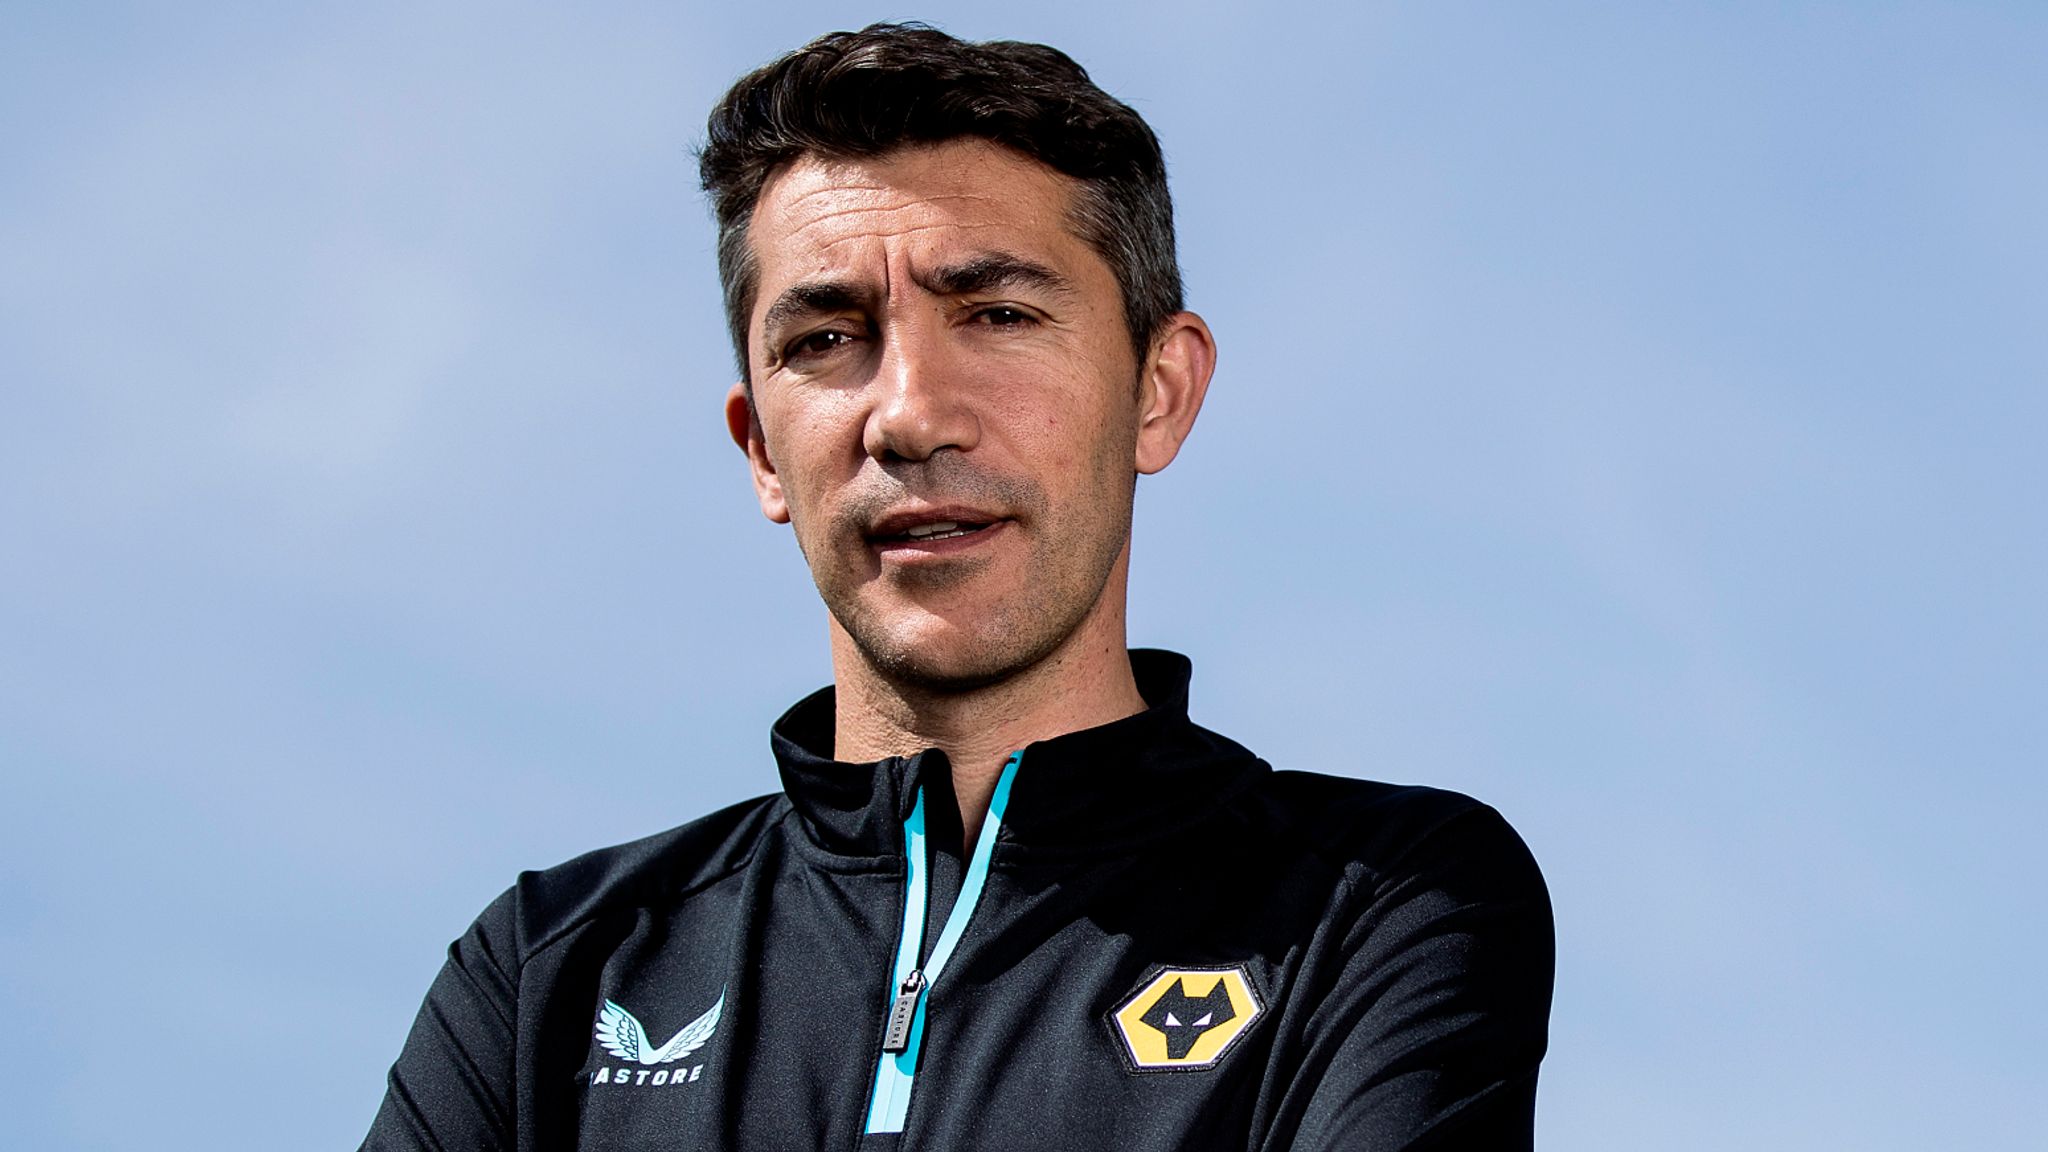 Wolves Bruno Lage Explains why Portuguese midfielder Ruben Neves was right to snub transfer to Man Utd!